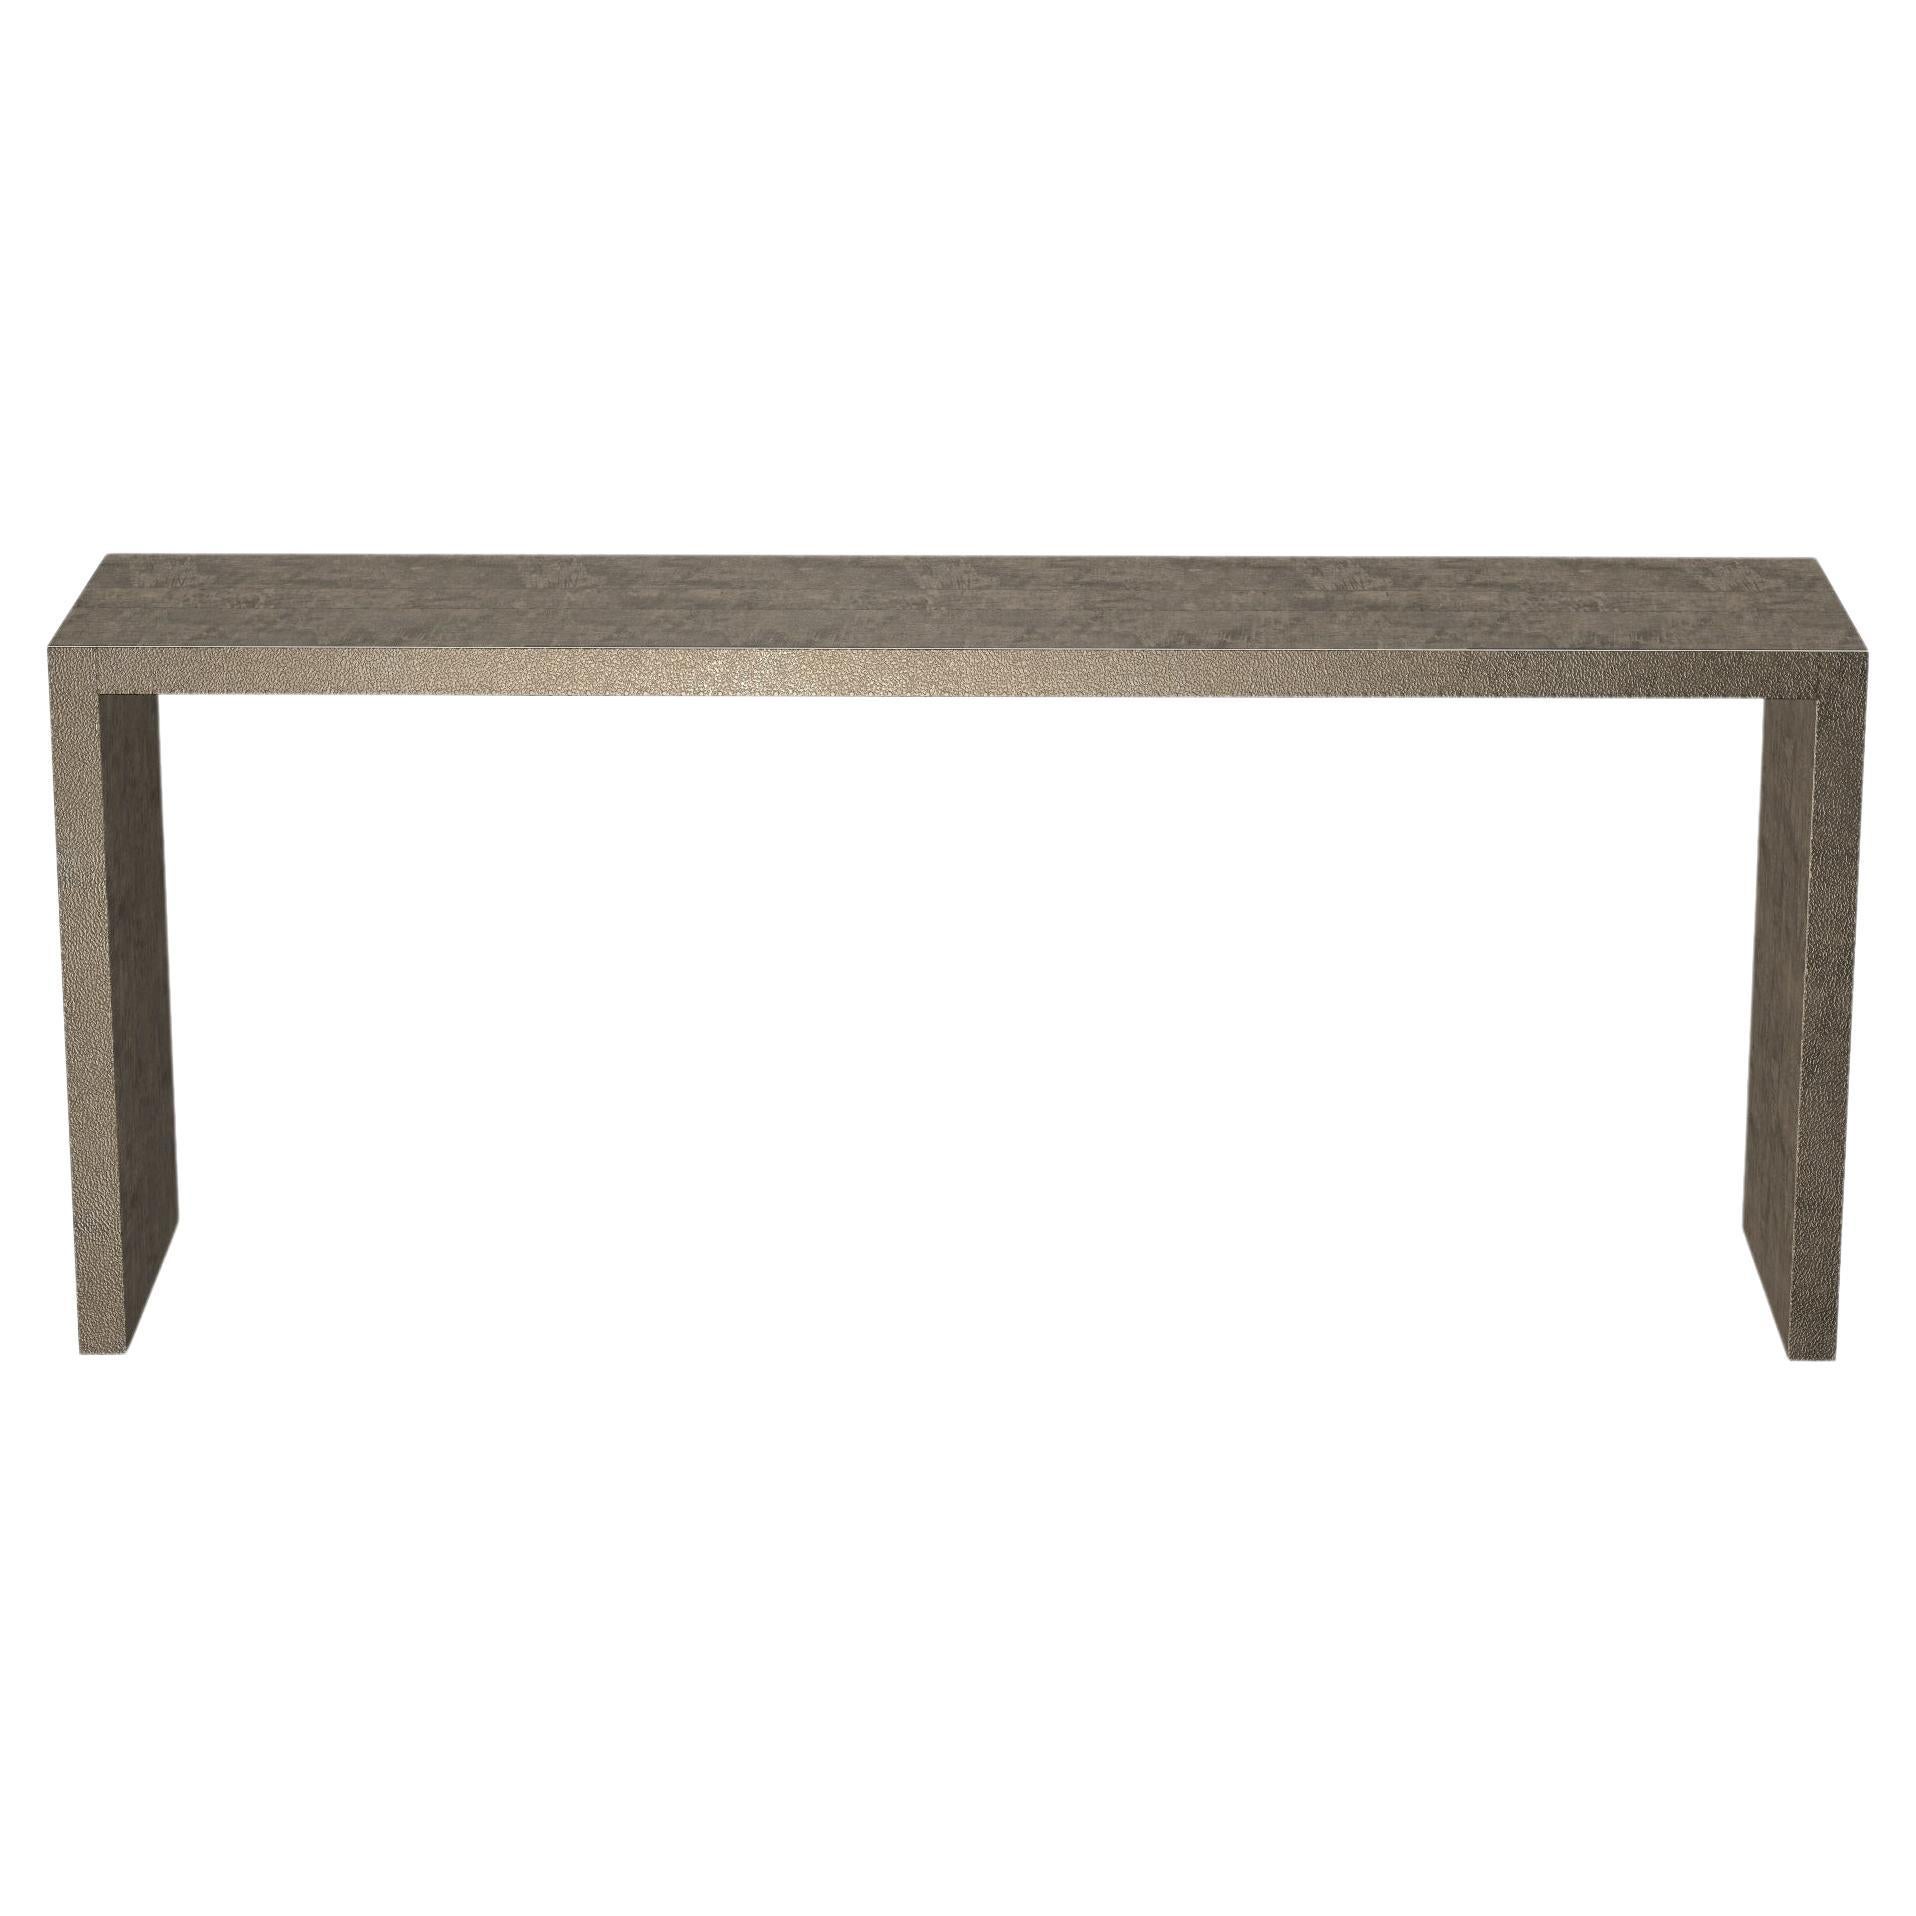 Art Deco Rectangular Console Tables Fine Hammered Antique Bronze by Alison Spear For Sale